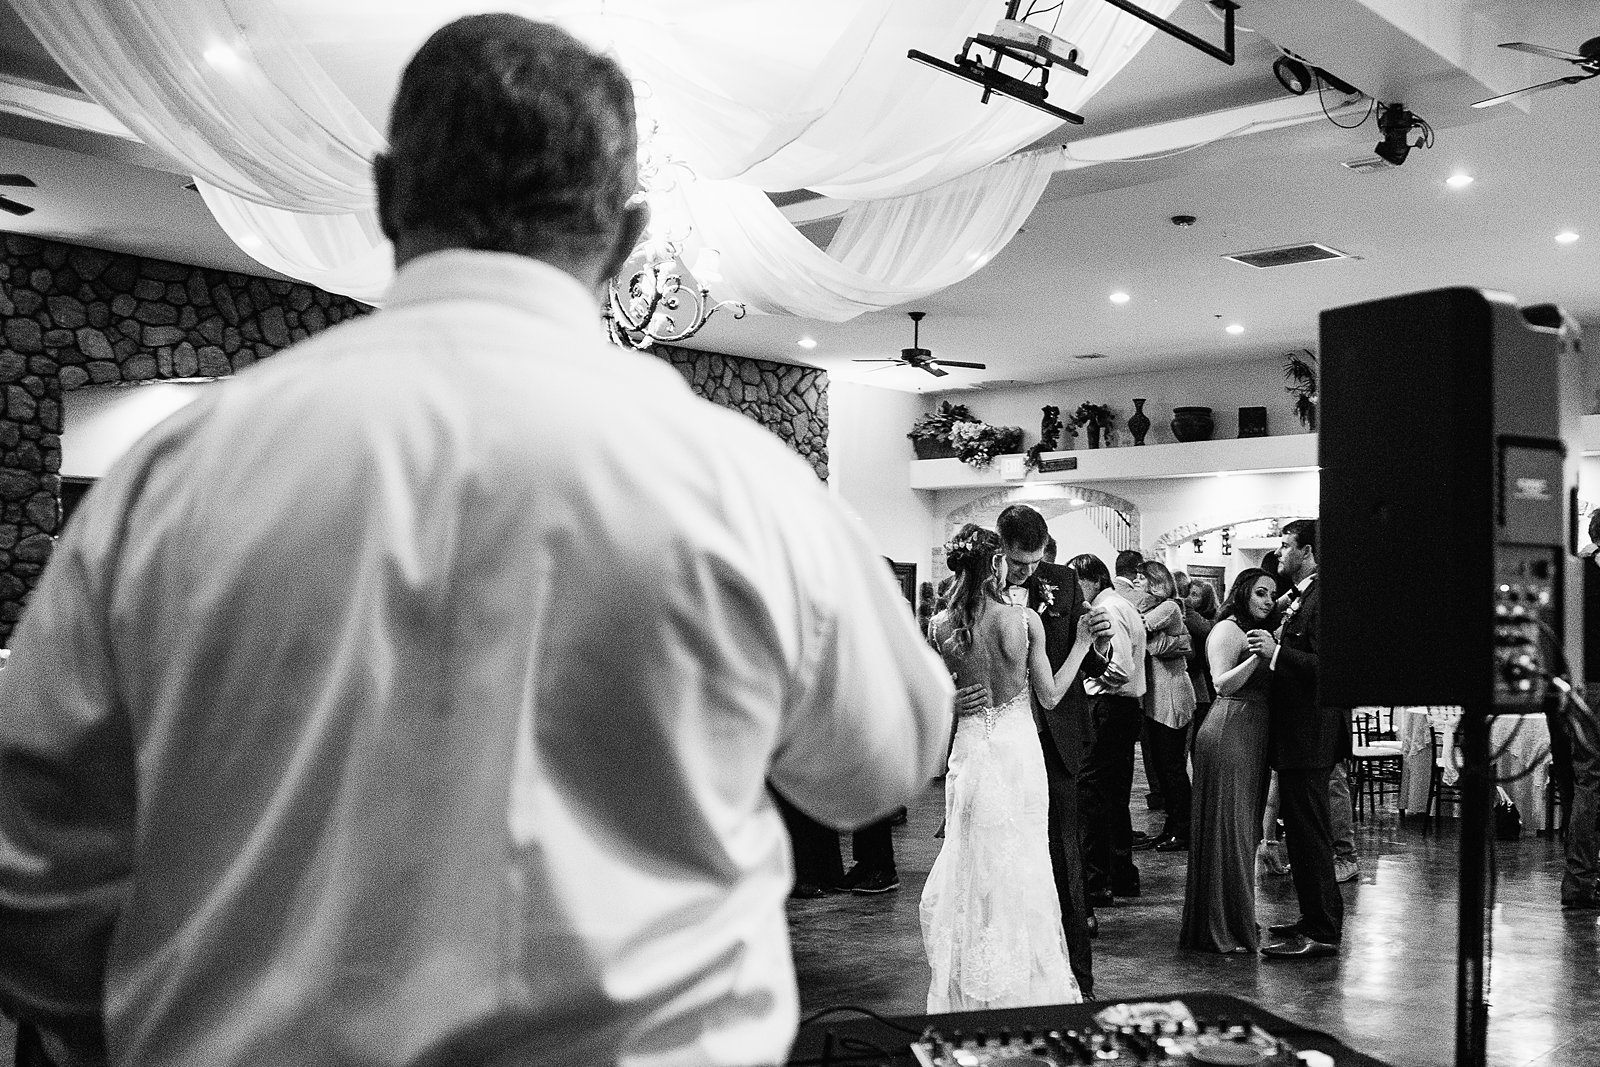 Bride and groom share a dance with guests while the bride's dad sings a song.